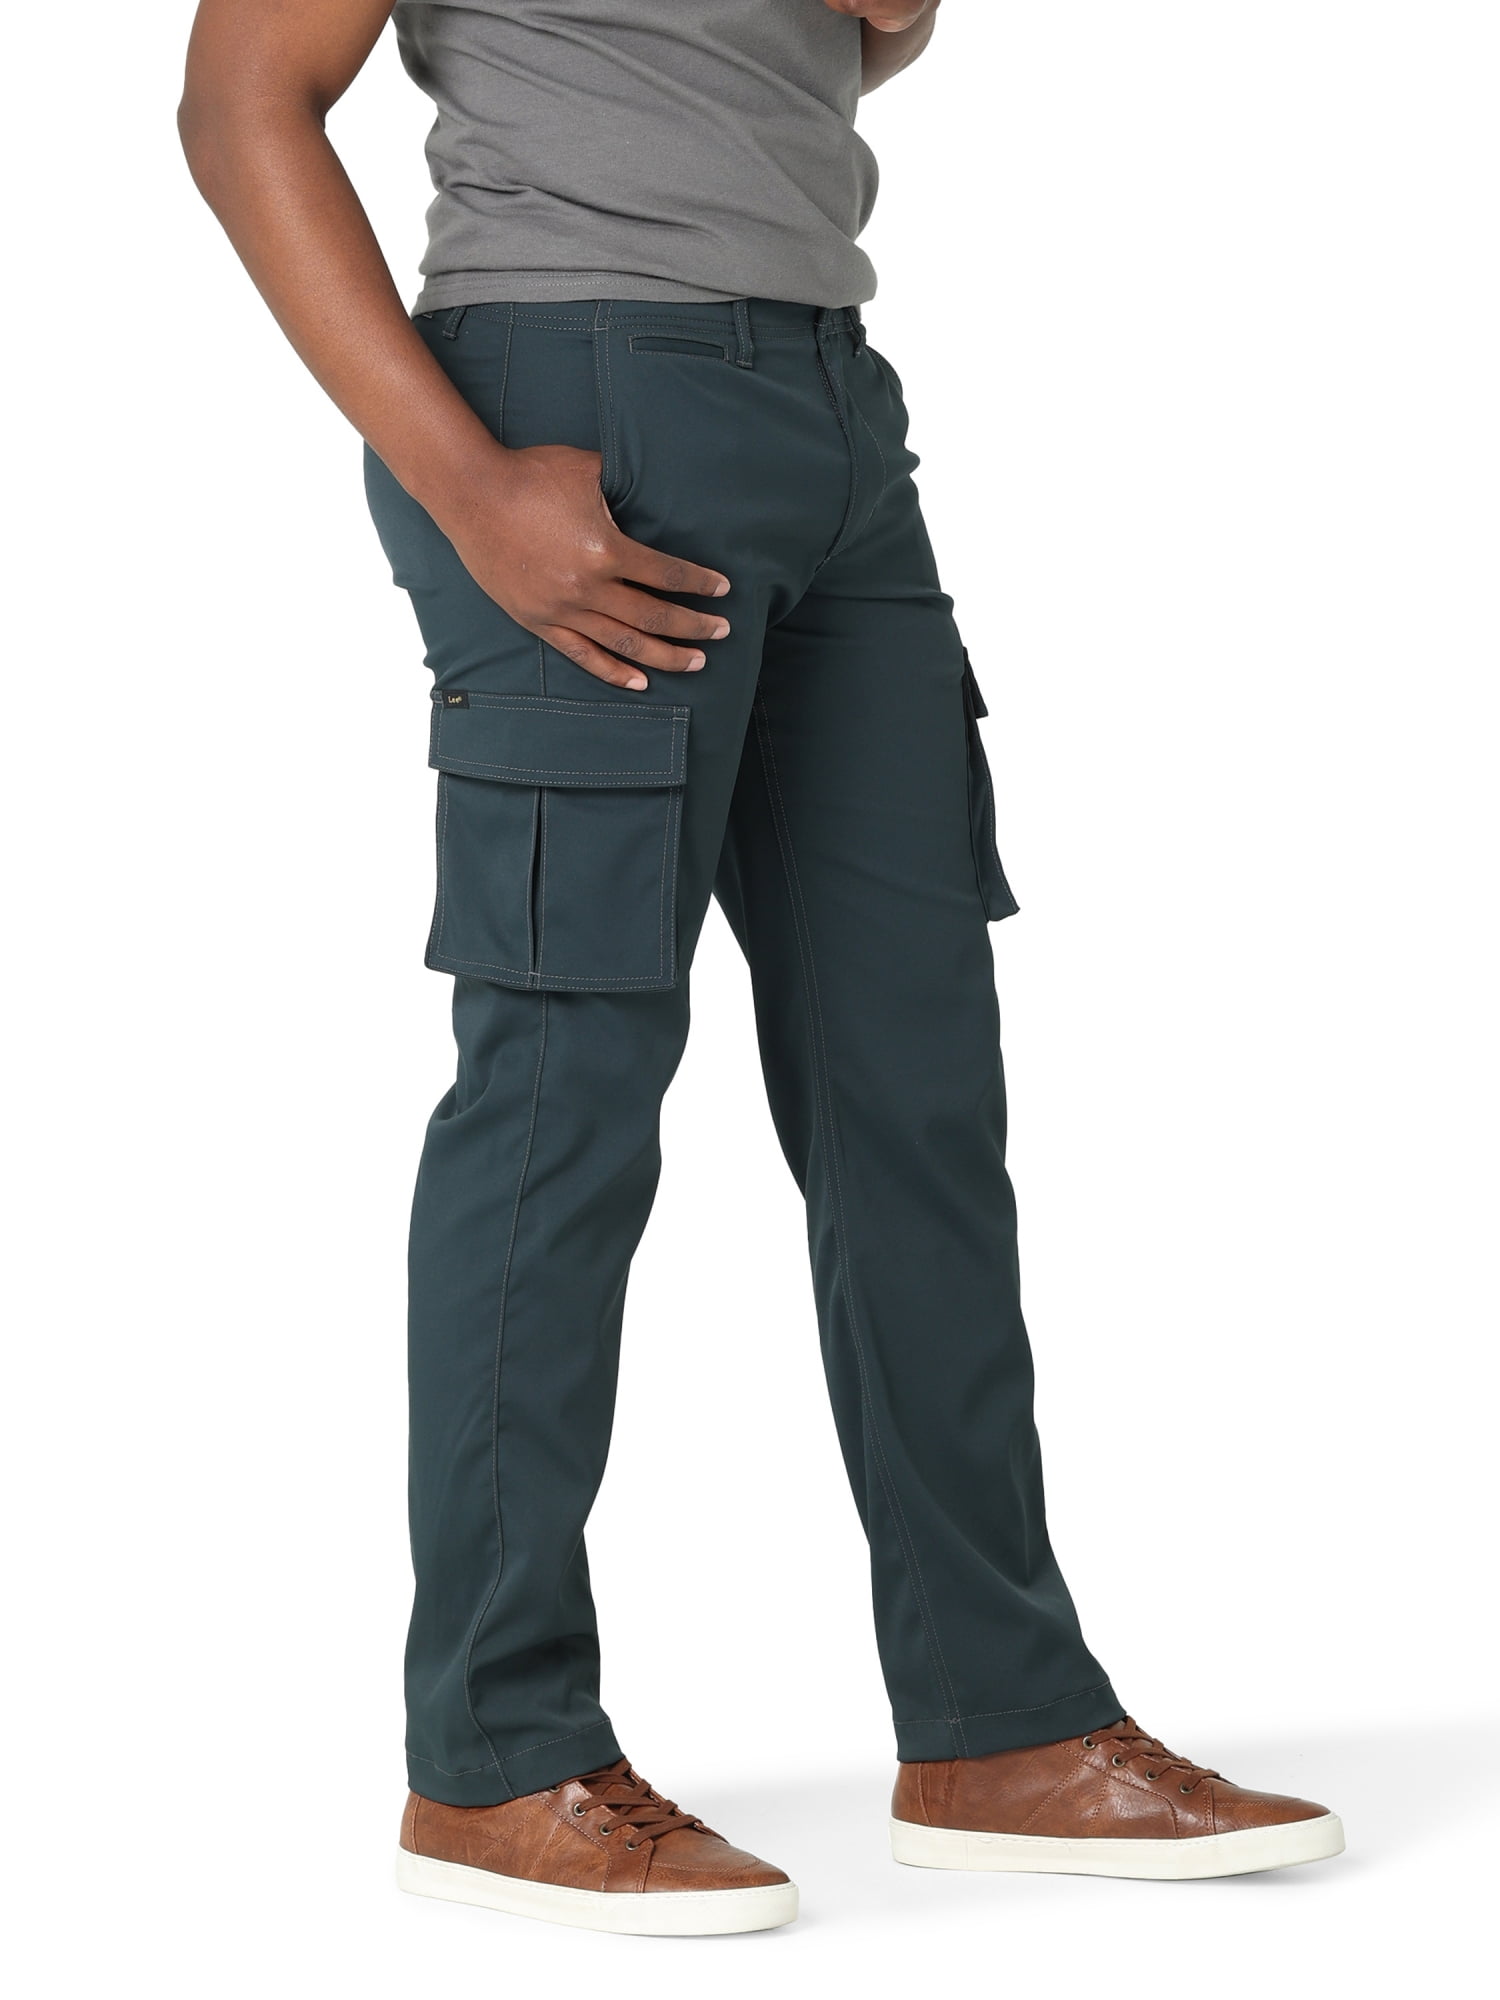 LEE Men Straight Fit Stretch Total Freedom Pants Wrinkle / Stain Resistant  NEW - La Paz County Sheriff's Office 